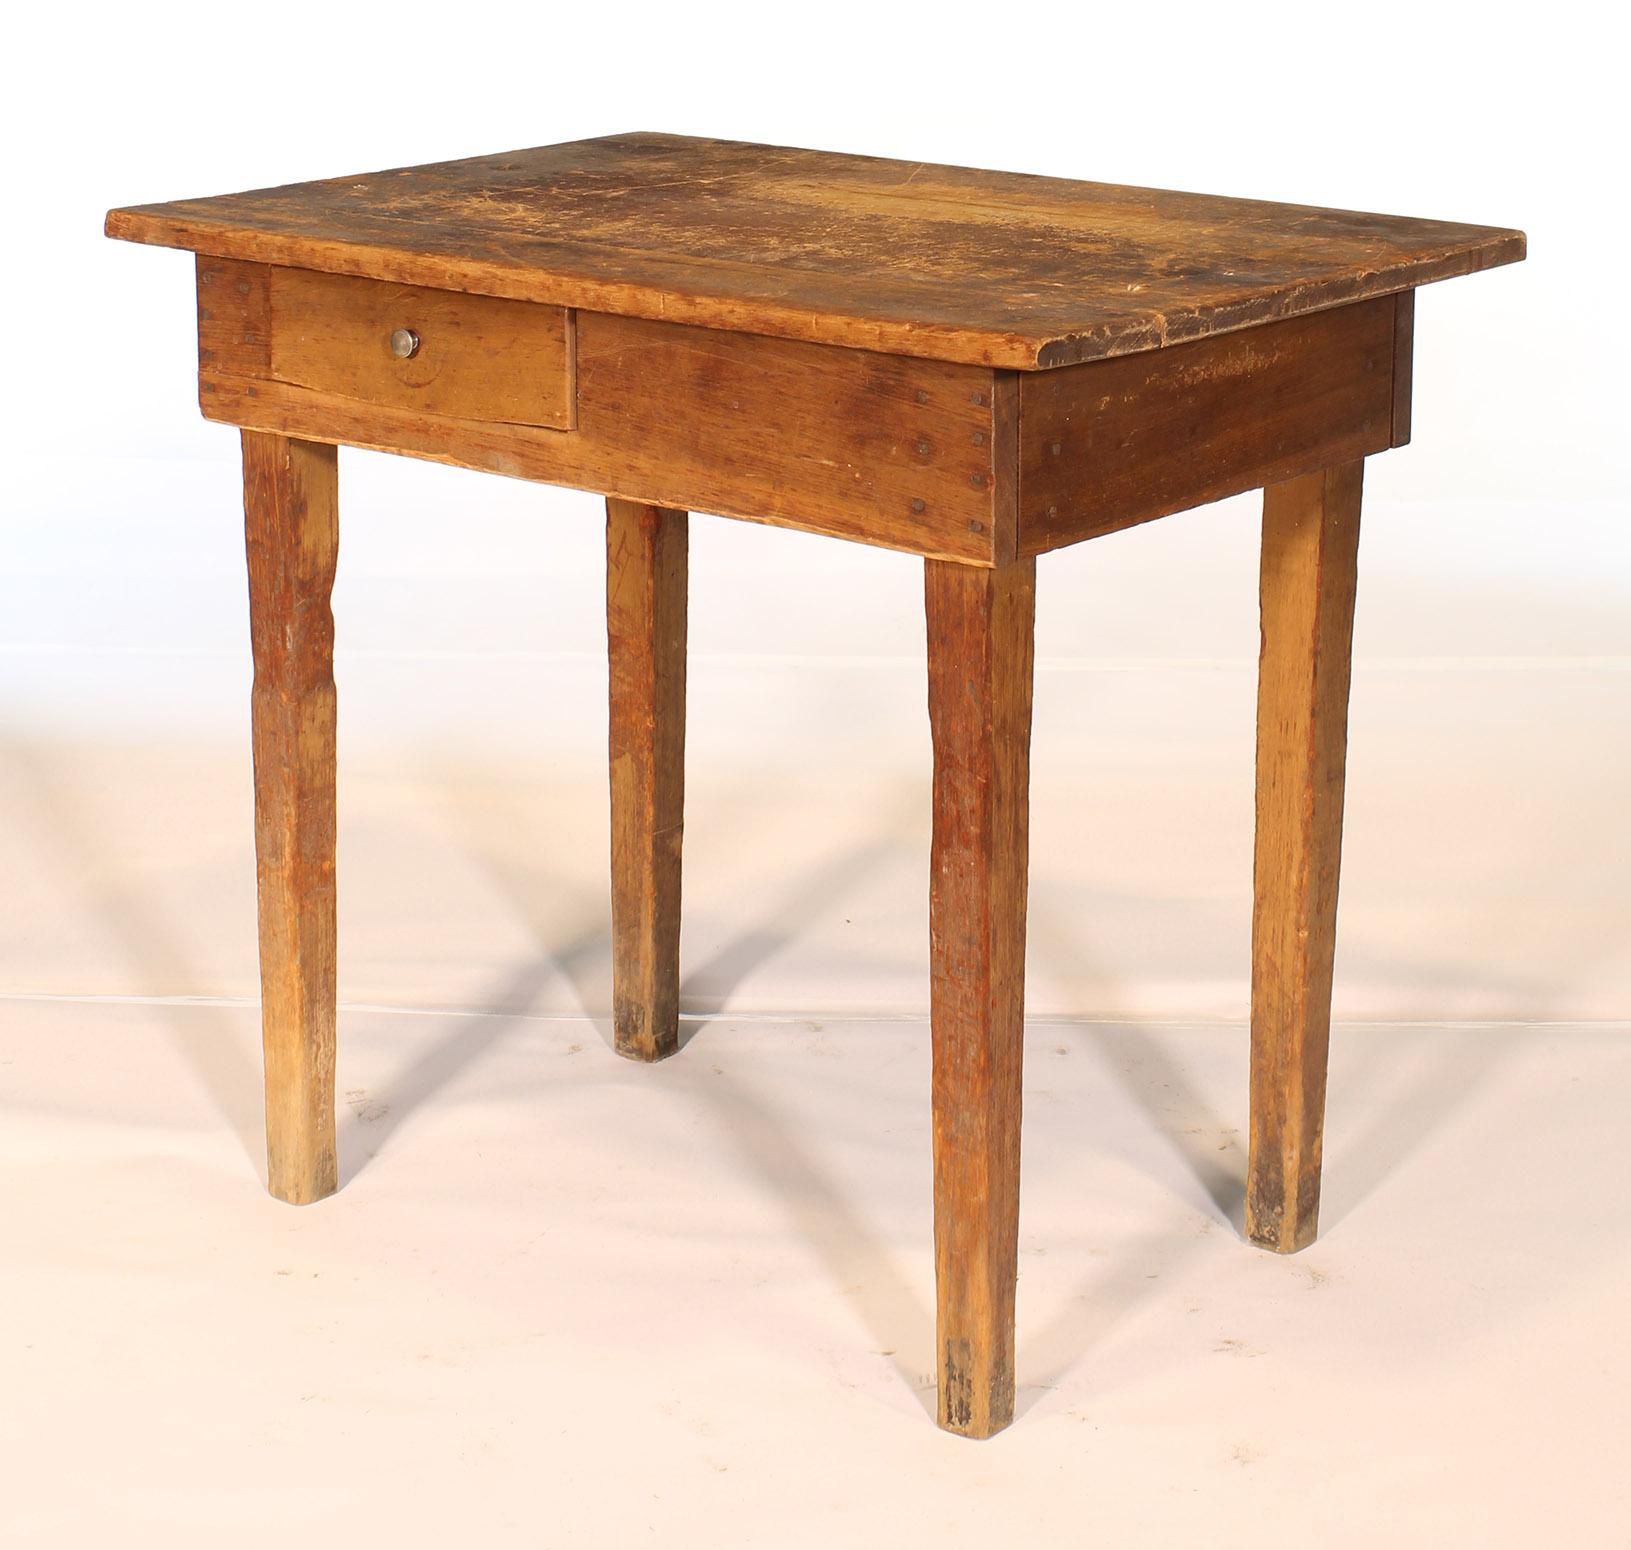 Antique Primitive country / farm style wooden desk / school table with a single drawer. Incredible natural wear to the desk all around, especially the top and legs. Measures: 31 1/4